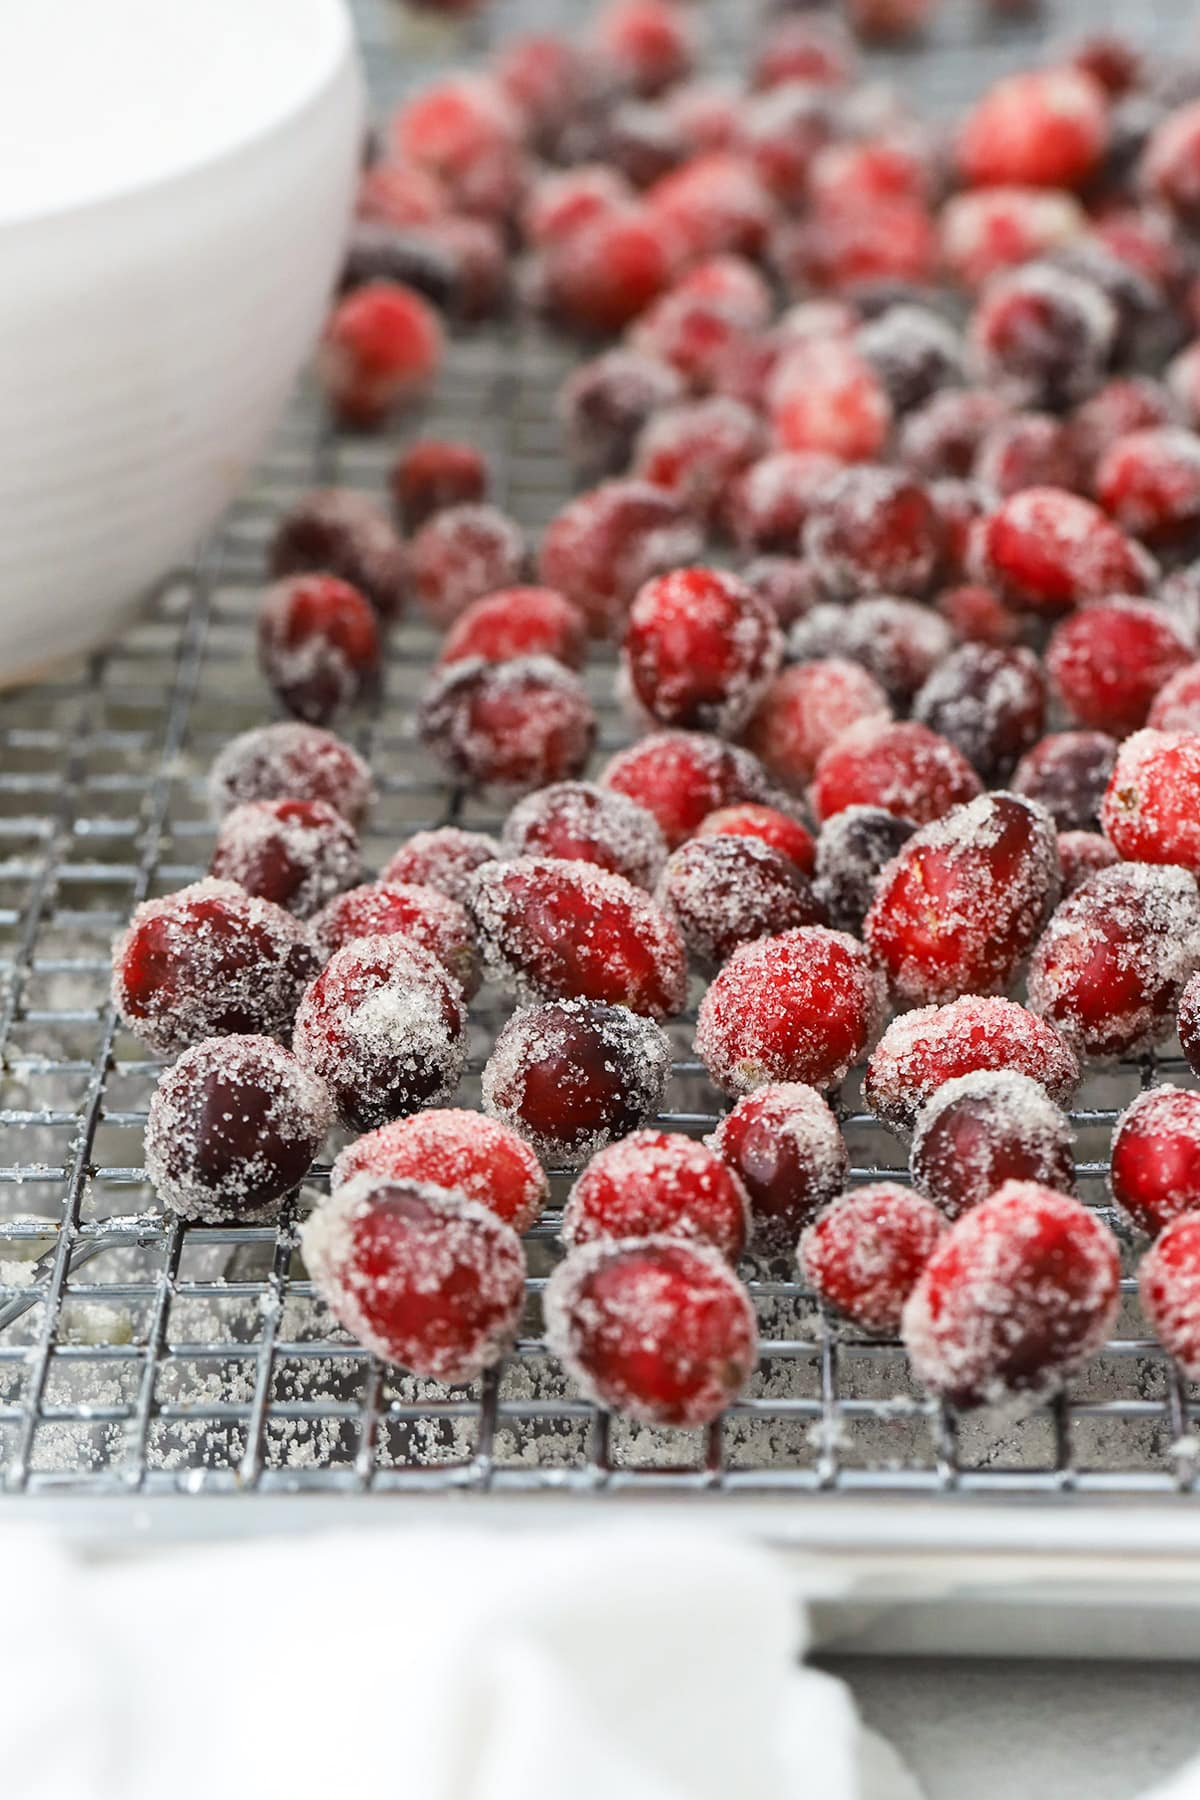 Front view of sugar covered cranberries on a wire rack